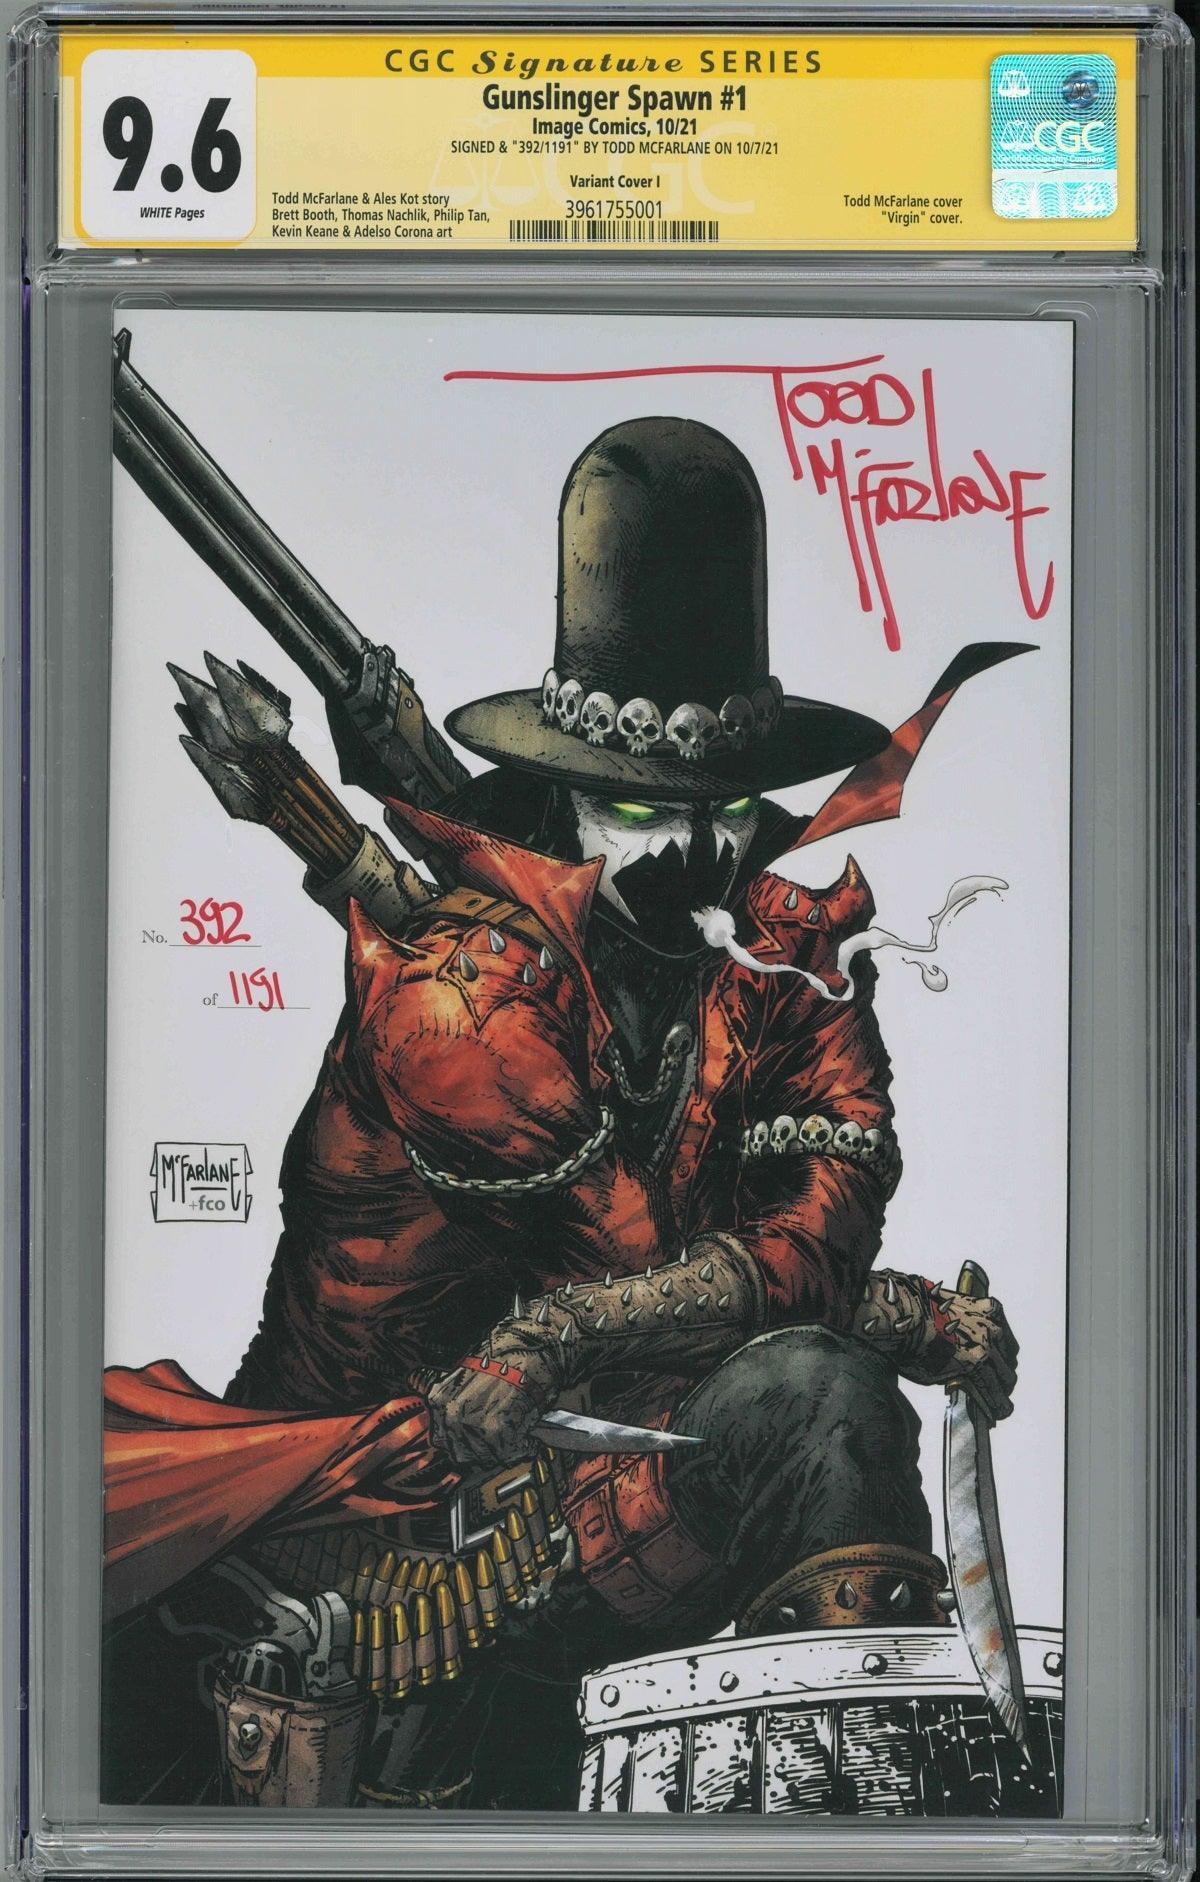 CGC GUNSLINGER SPAWN #1 COVER I 1:250 (9.6) SIGNATURE SERIES - SIGNED BY TODD MCFARLANE - Kings Comics